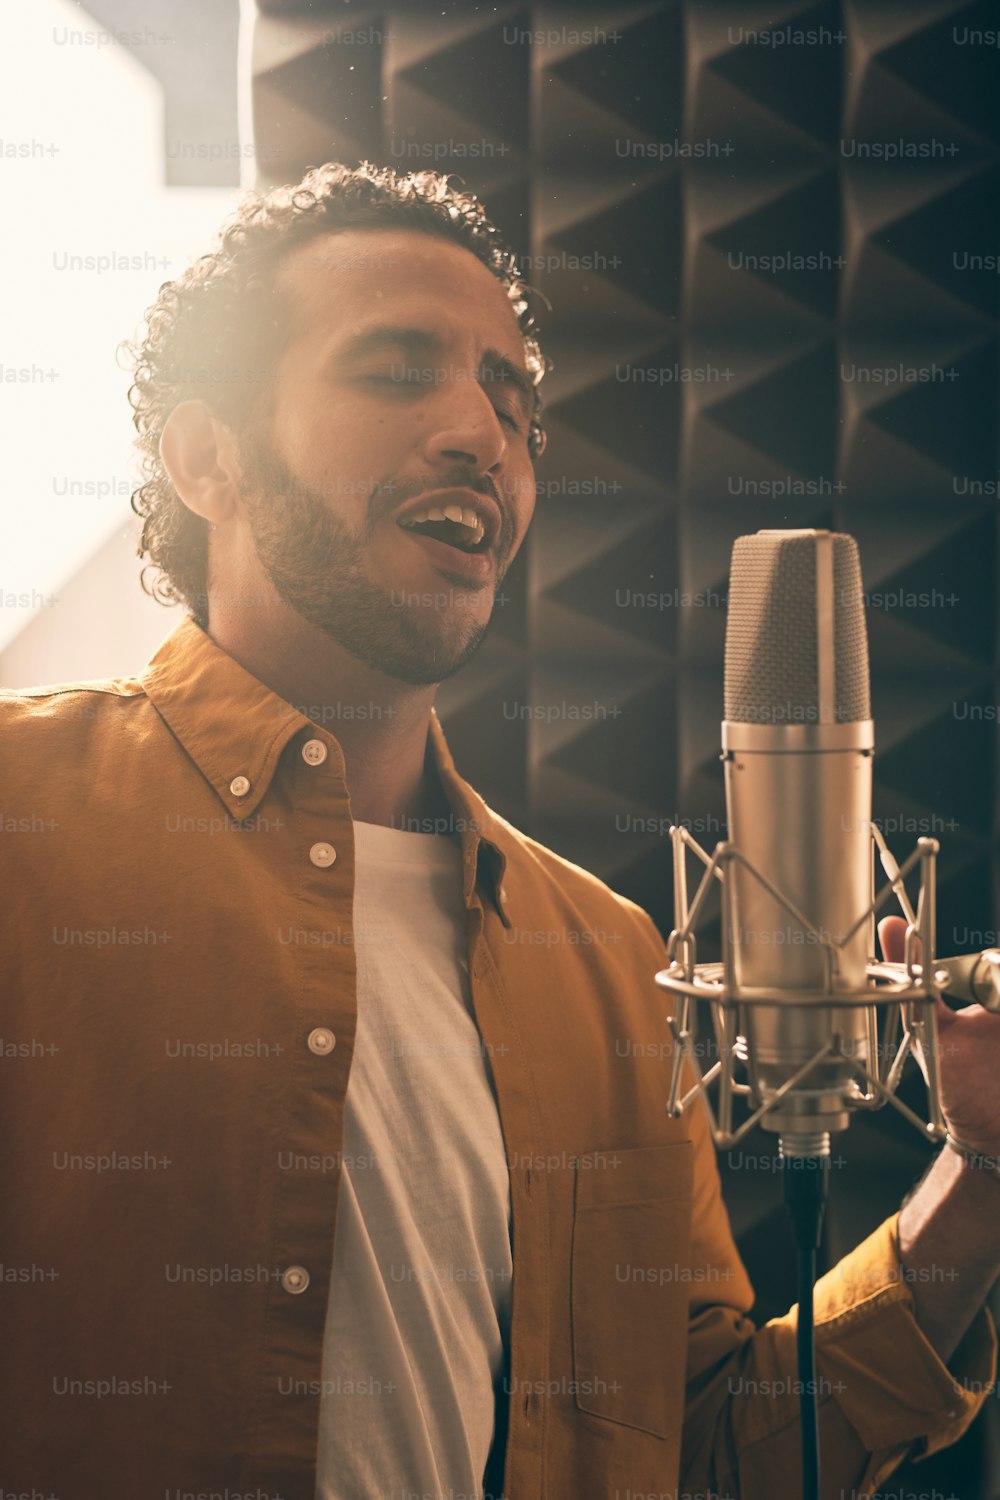 Portrait of moroccan man in yellow shirt singing with microphone in professional recording studio